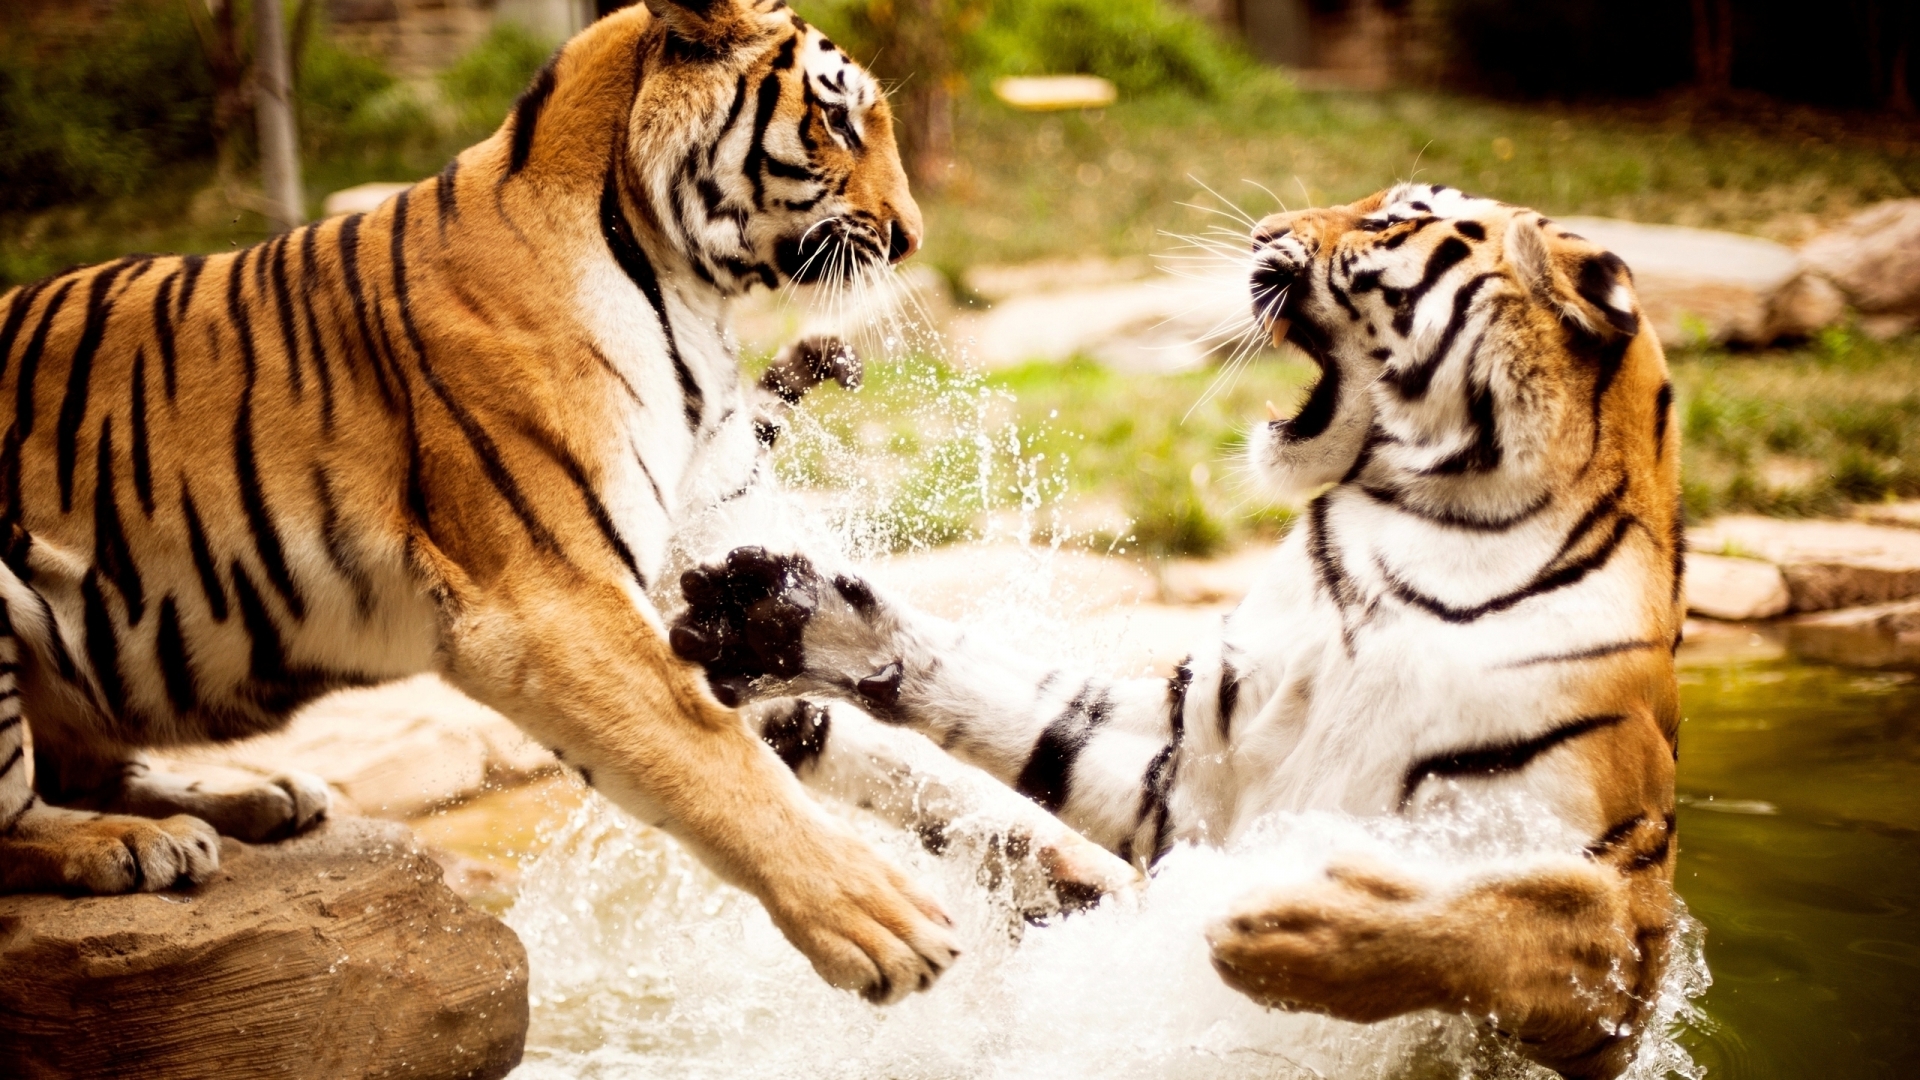 Tigers Fight for 1920 x 1080 HDTV 1080p resolution